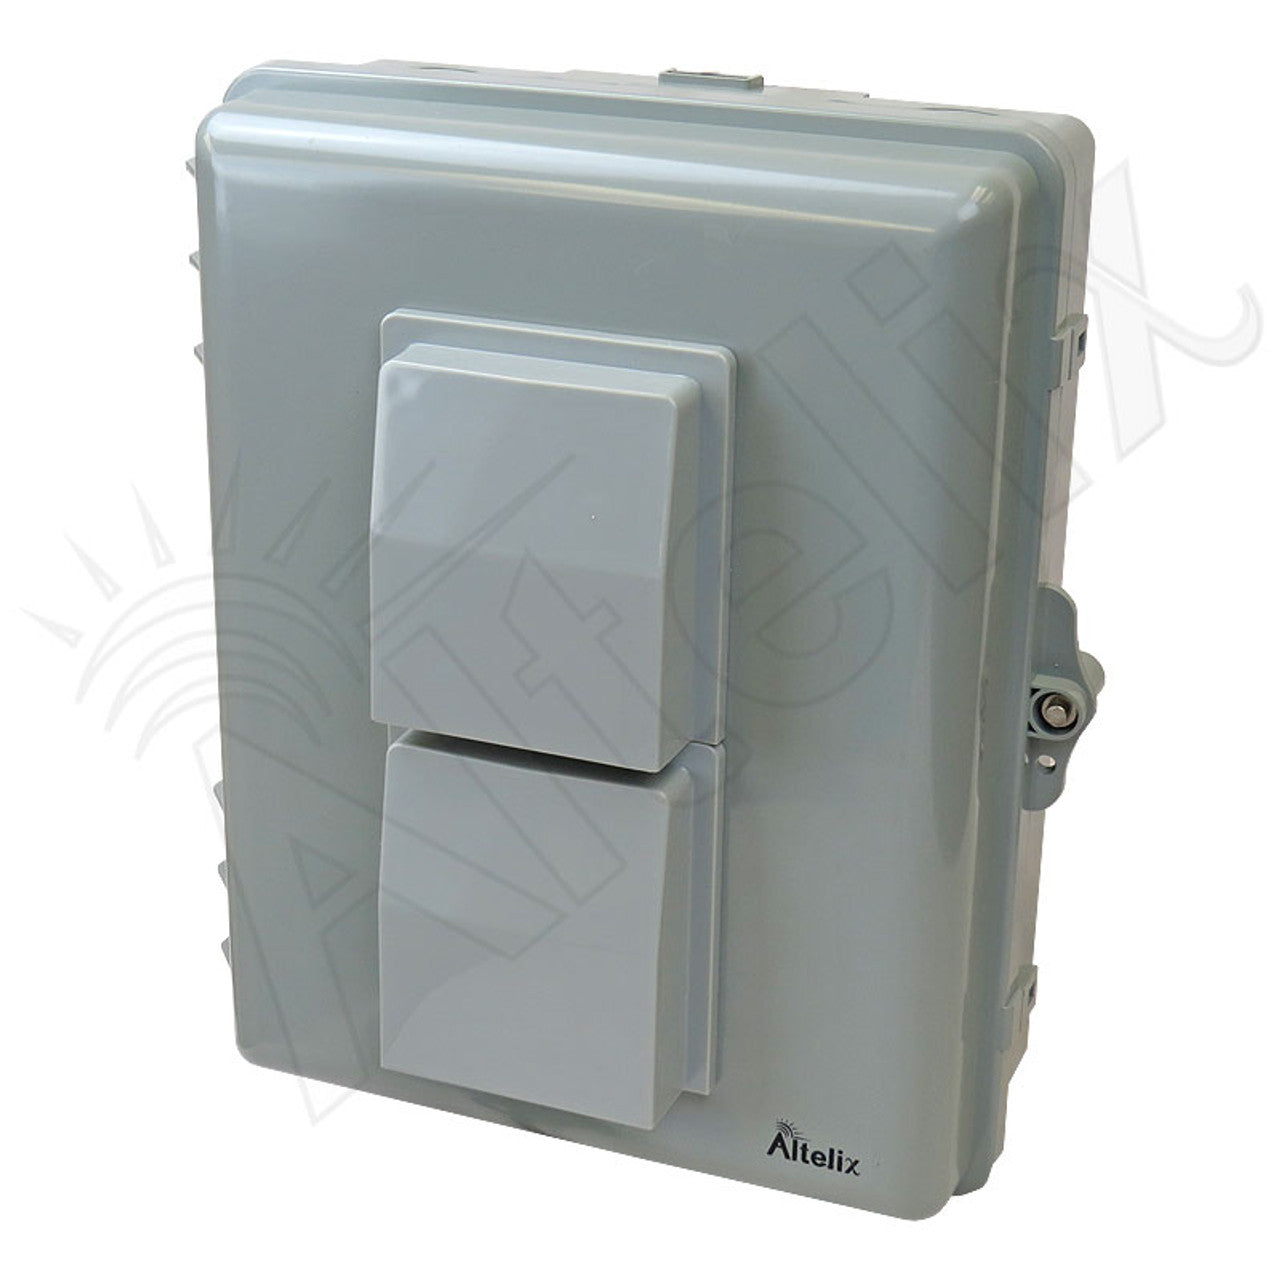 Altelix Weatherproof Vented WiFi Enclosure with No-Drill Equipment Mounting Plate, 120VAC Outlets and Power Cord-3